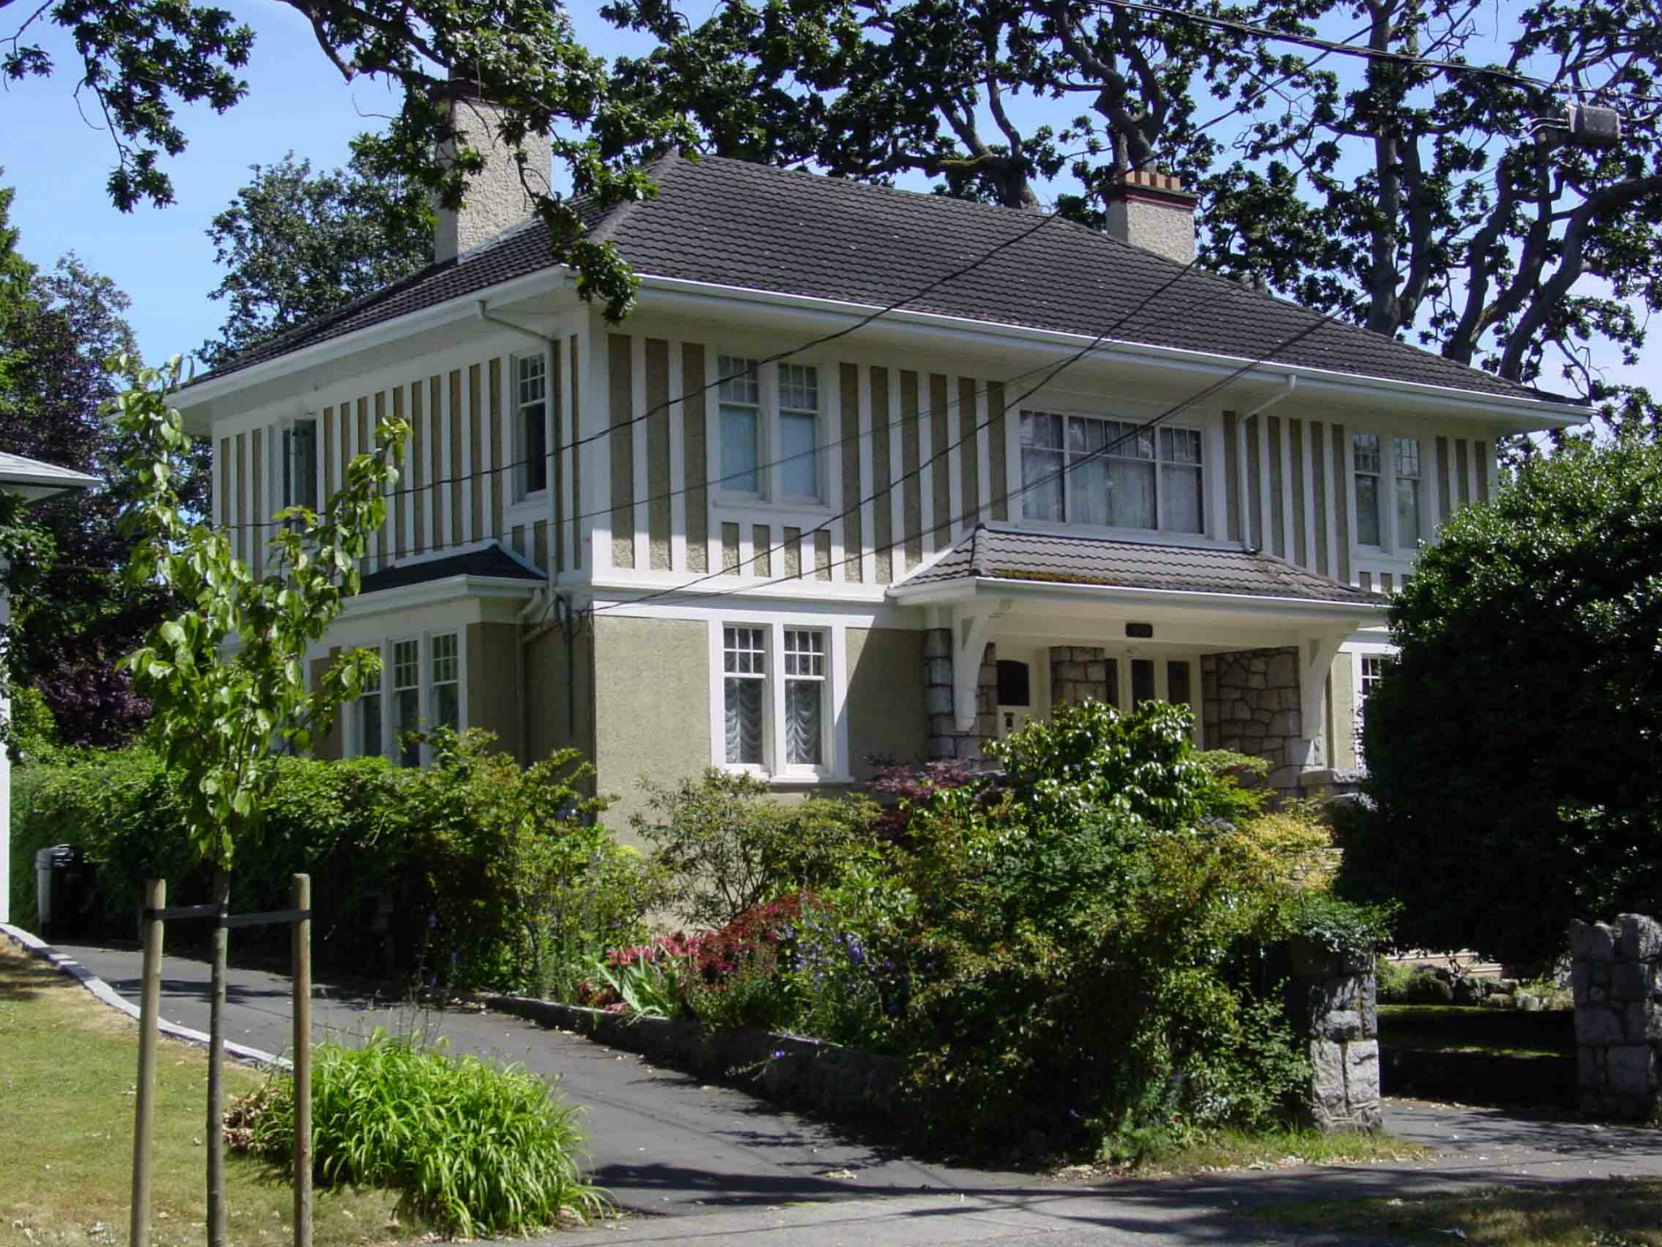 1025 Moss Street, designed by architect Samuel Maclure in 1912-13 for George and Josephine Richardson. This photo was taken in 2005, before the hedges obscured the street view of this Heritage house.